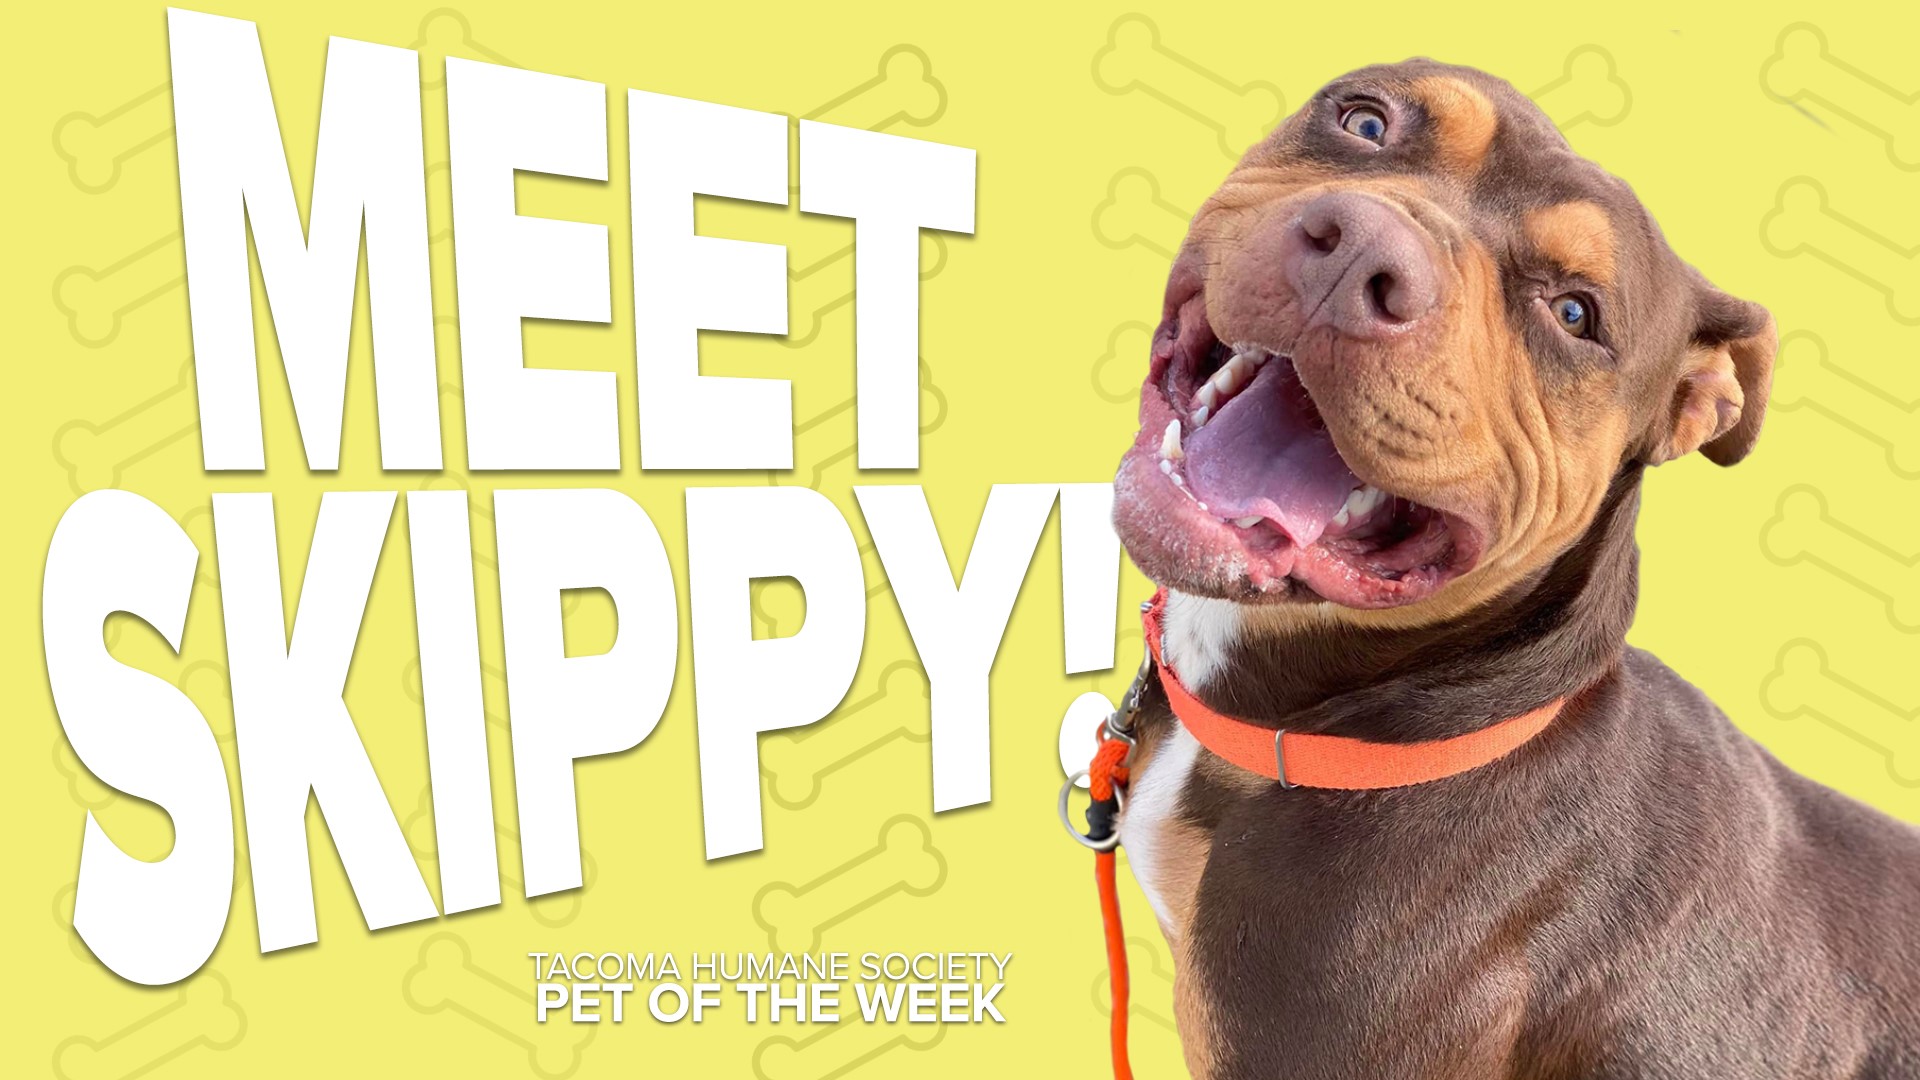 This week's featured adoptable pet is Skippy!